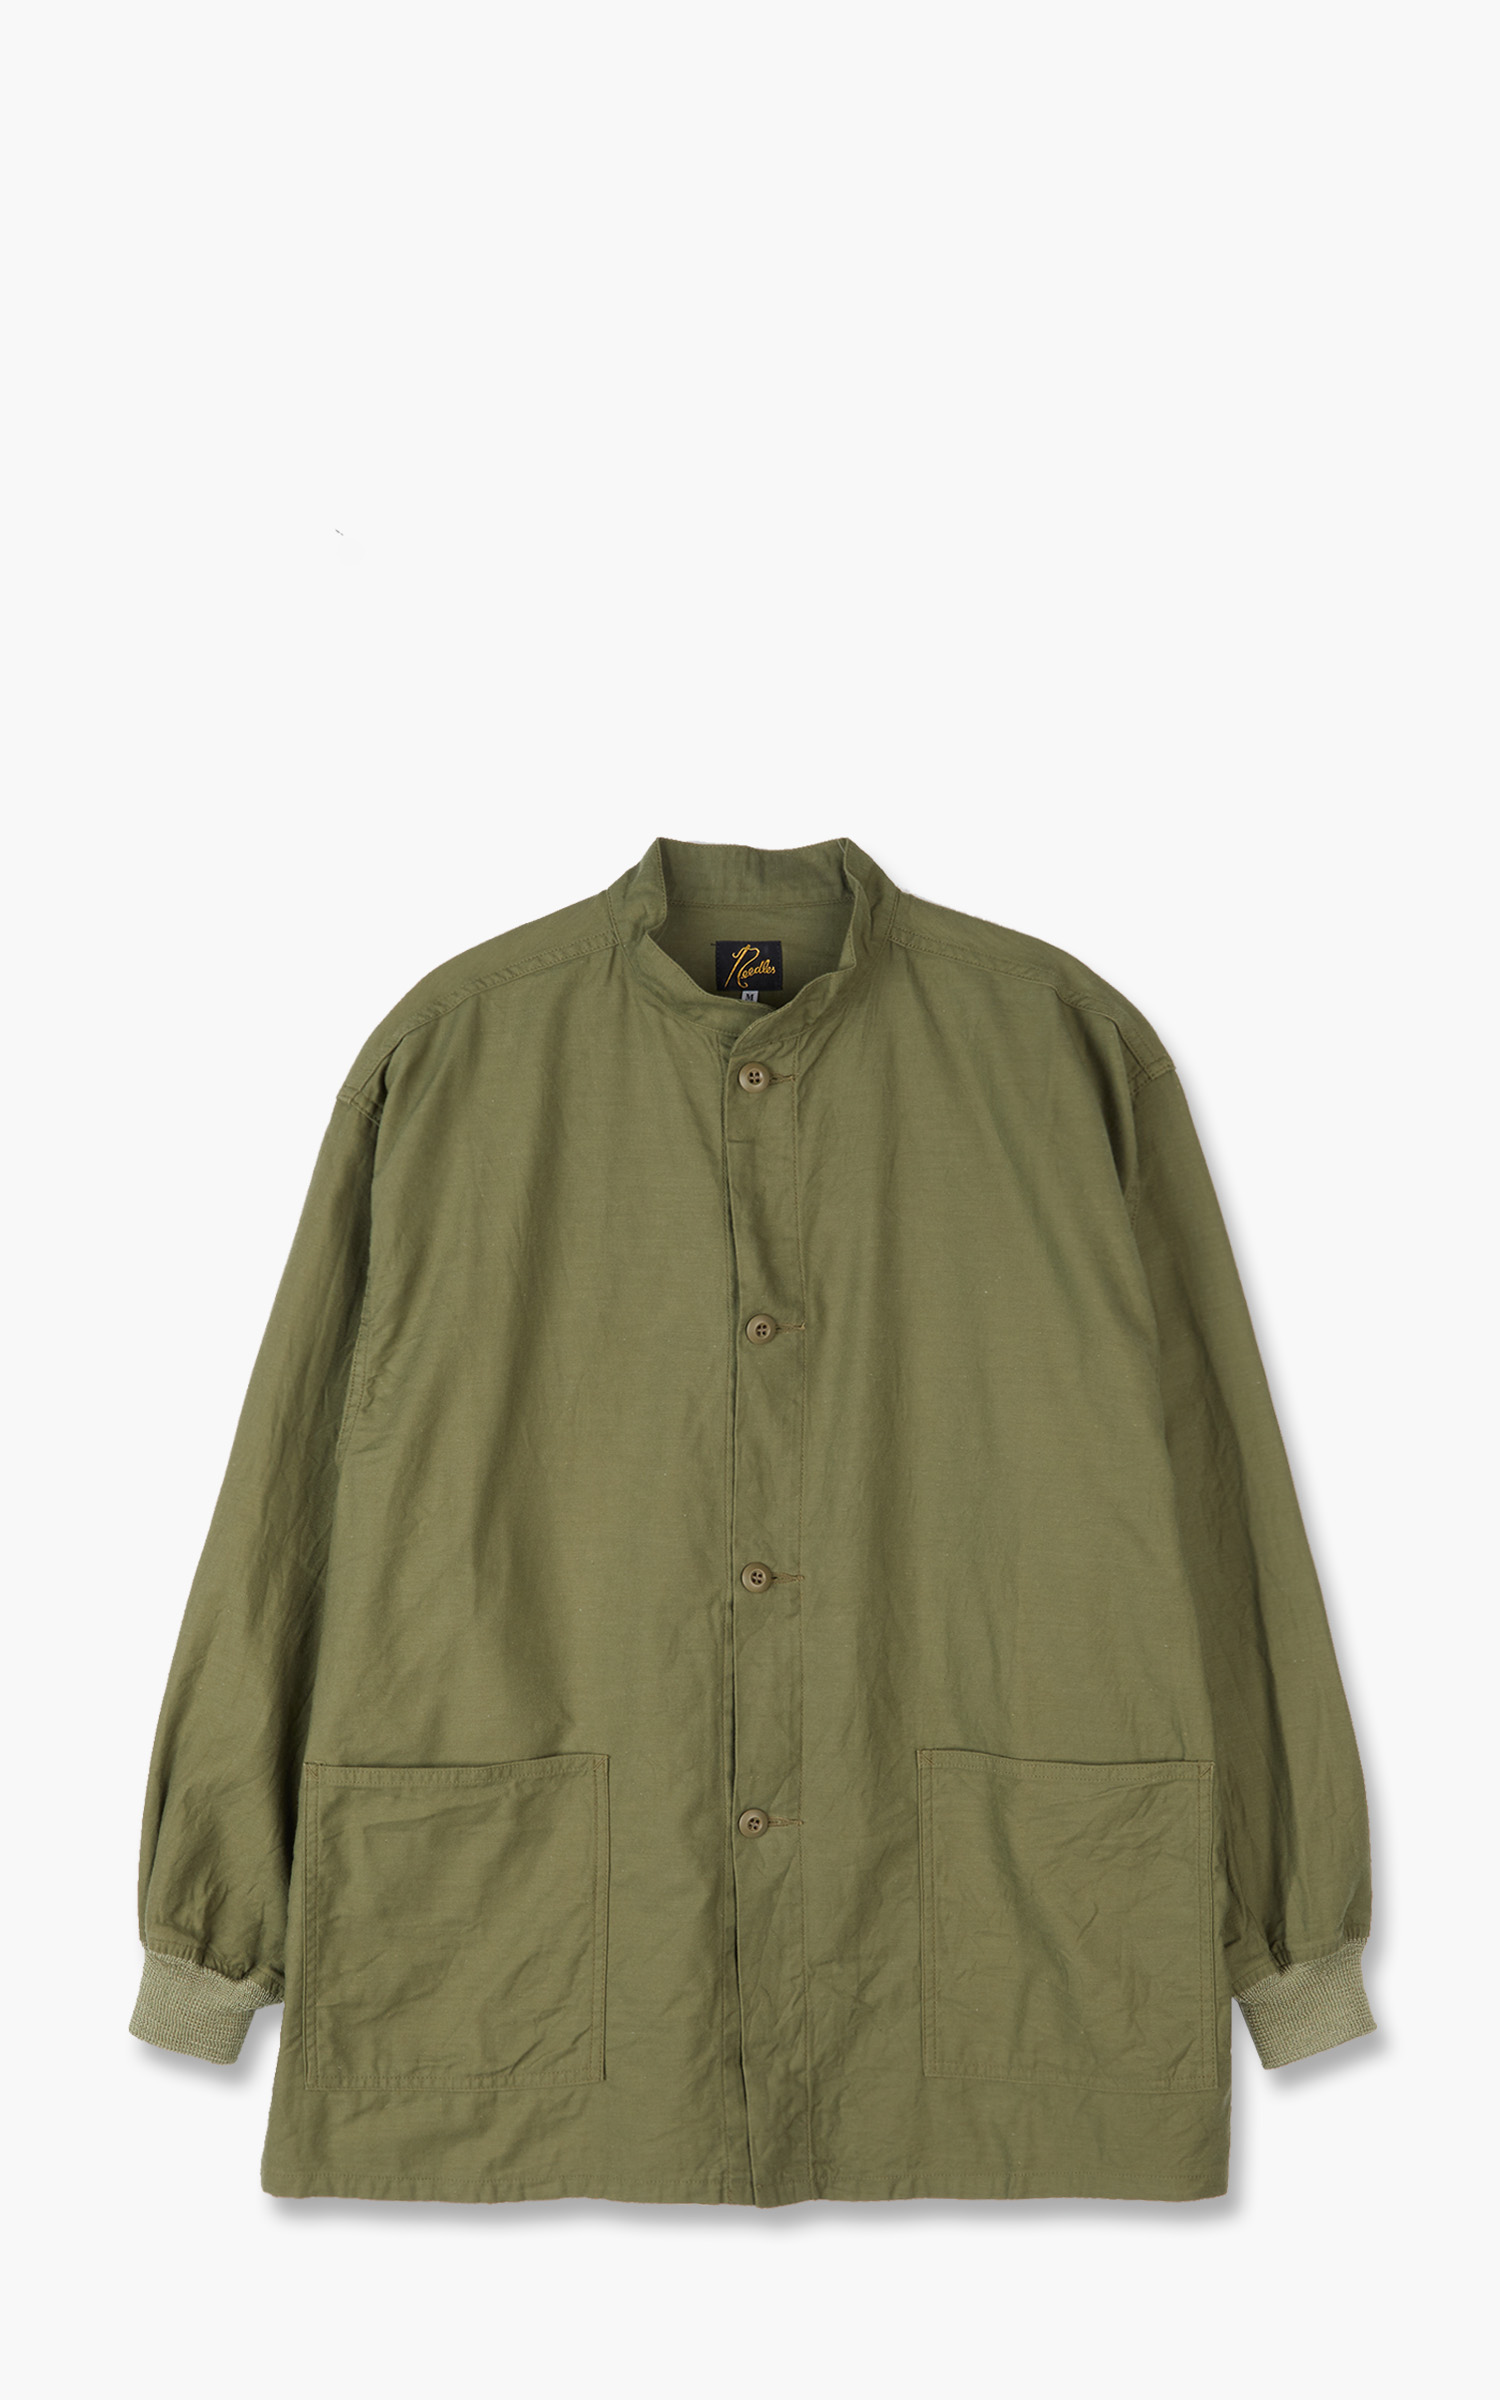 Needles S.C. Army Shirt Back Sateen Olive